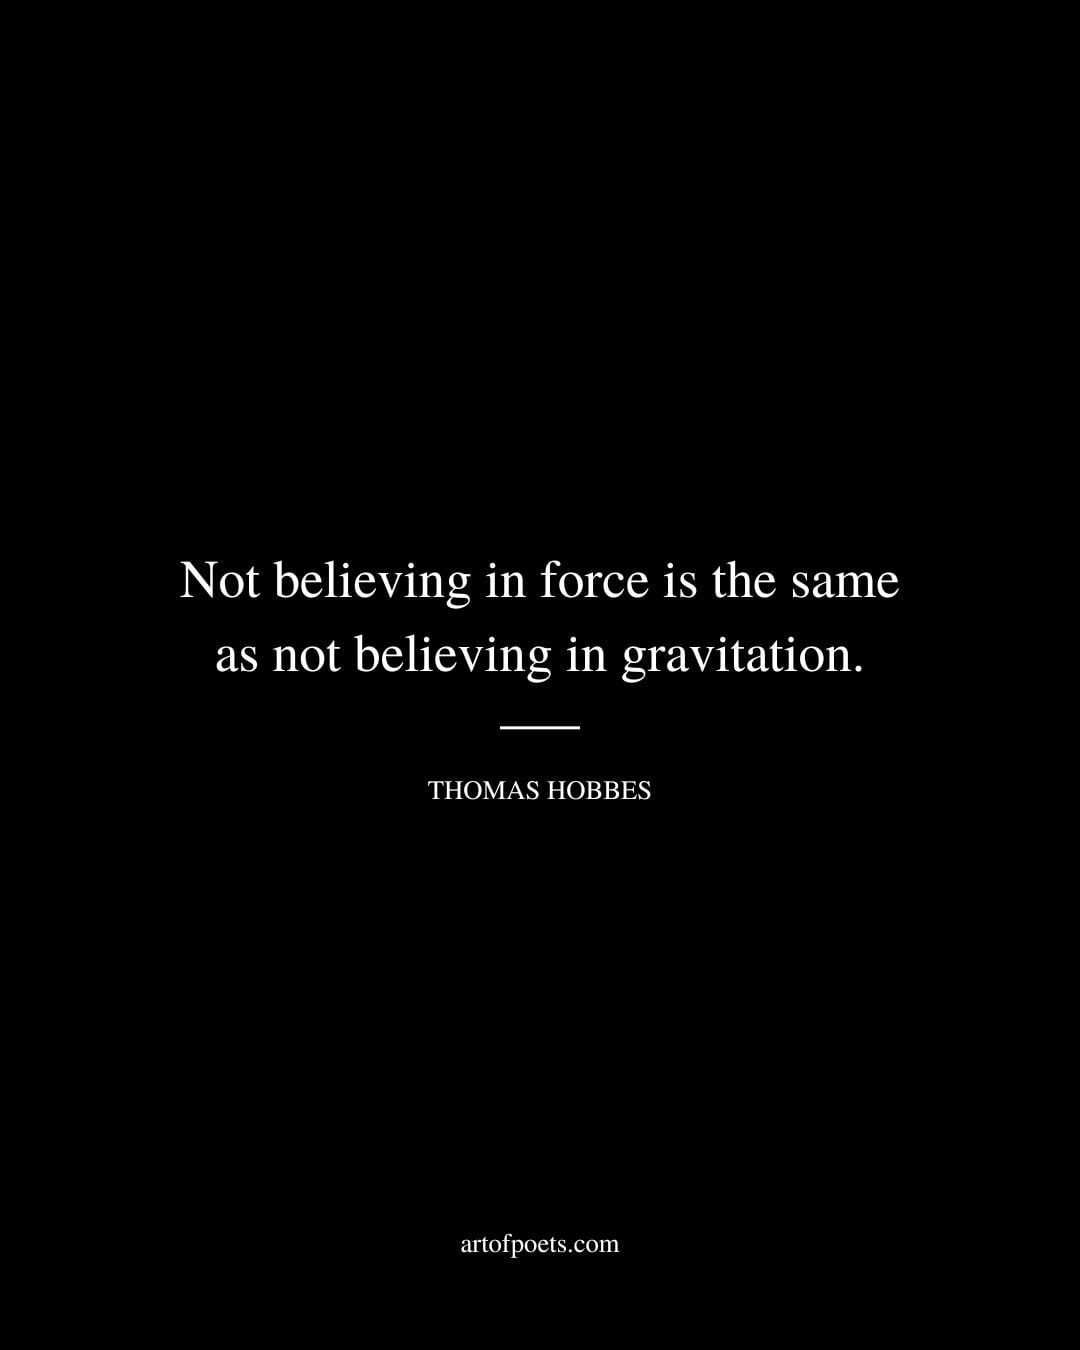 Not believing in force is the same as not believing in gravitation 1